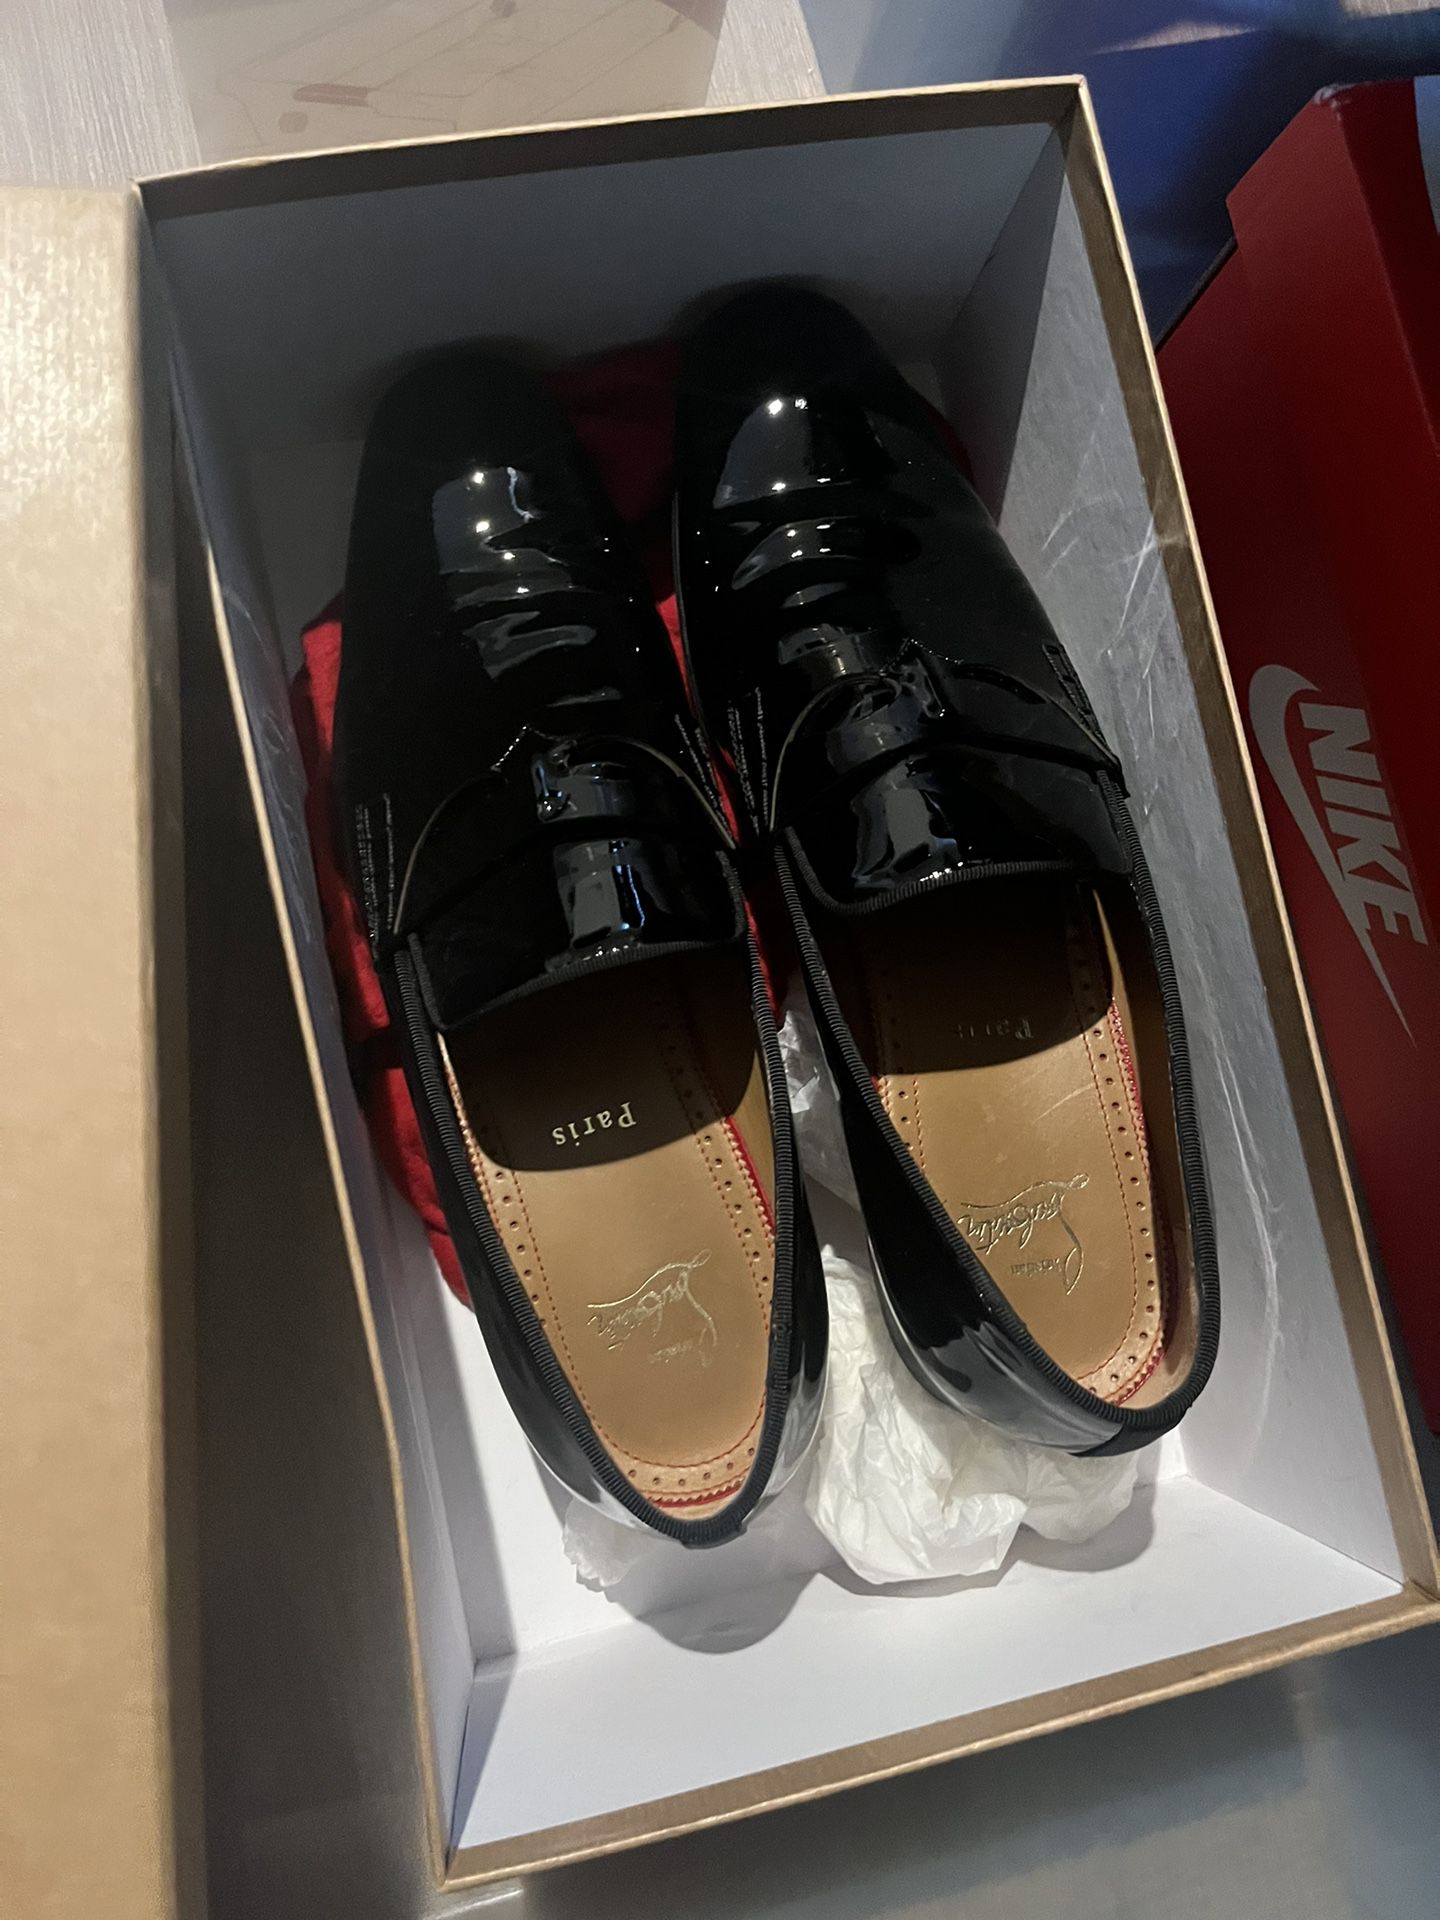 Christian Louboutin Dress Shoes Size 41 for Sale in Los Gatos, CA - OfferUp